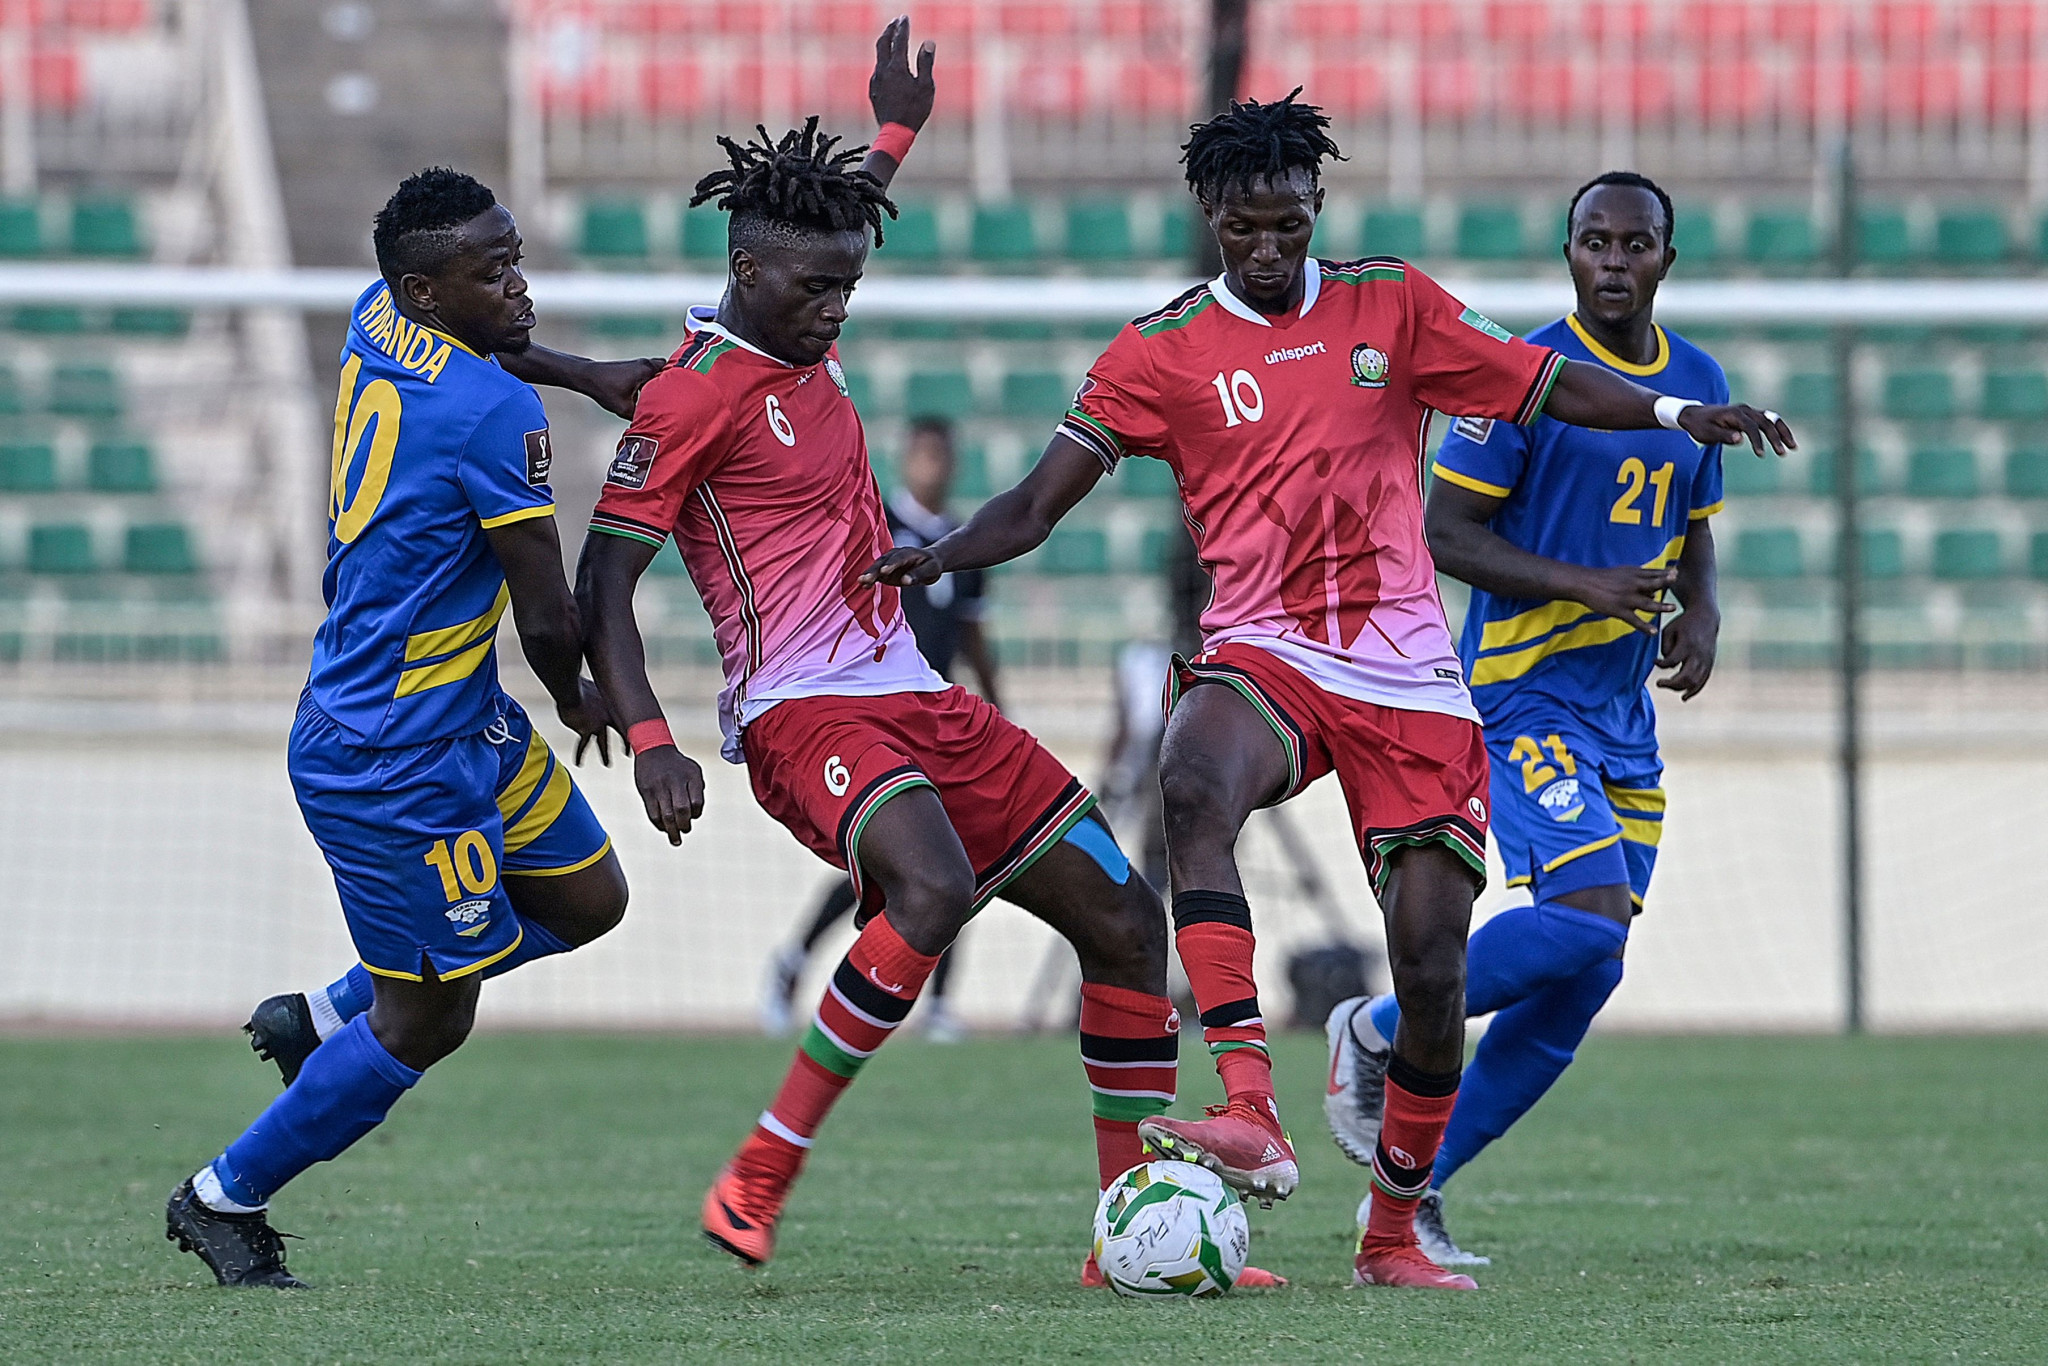 Kenya's men's football team are aiming to qualify for the African Games for the first time since 1987 ©Getty Images